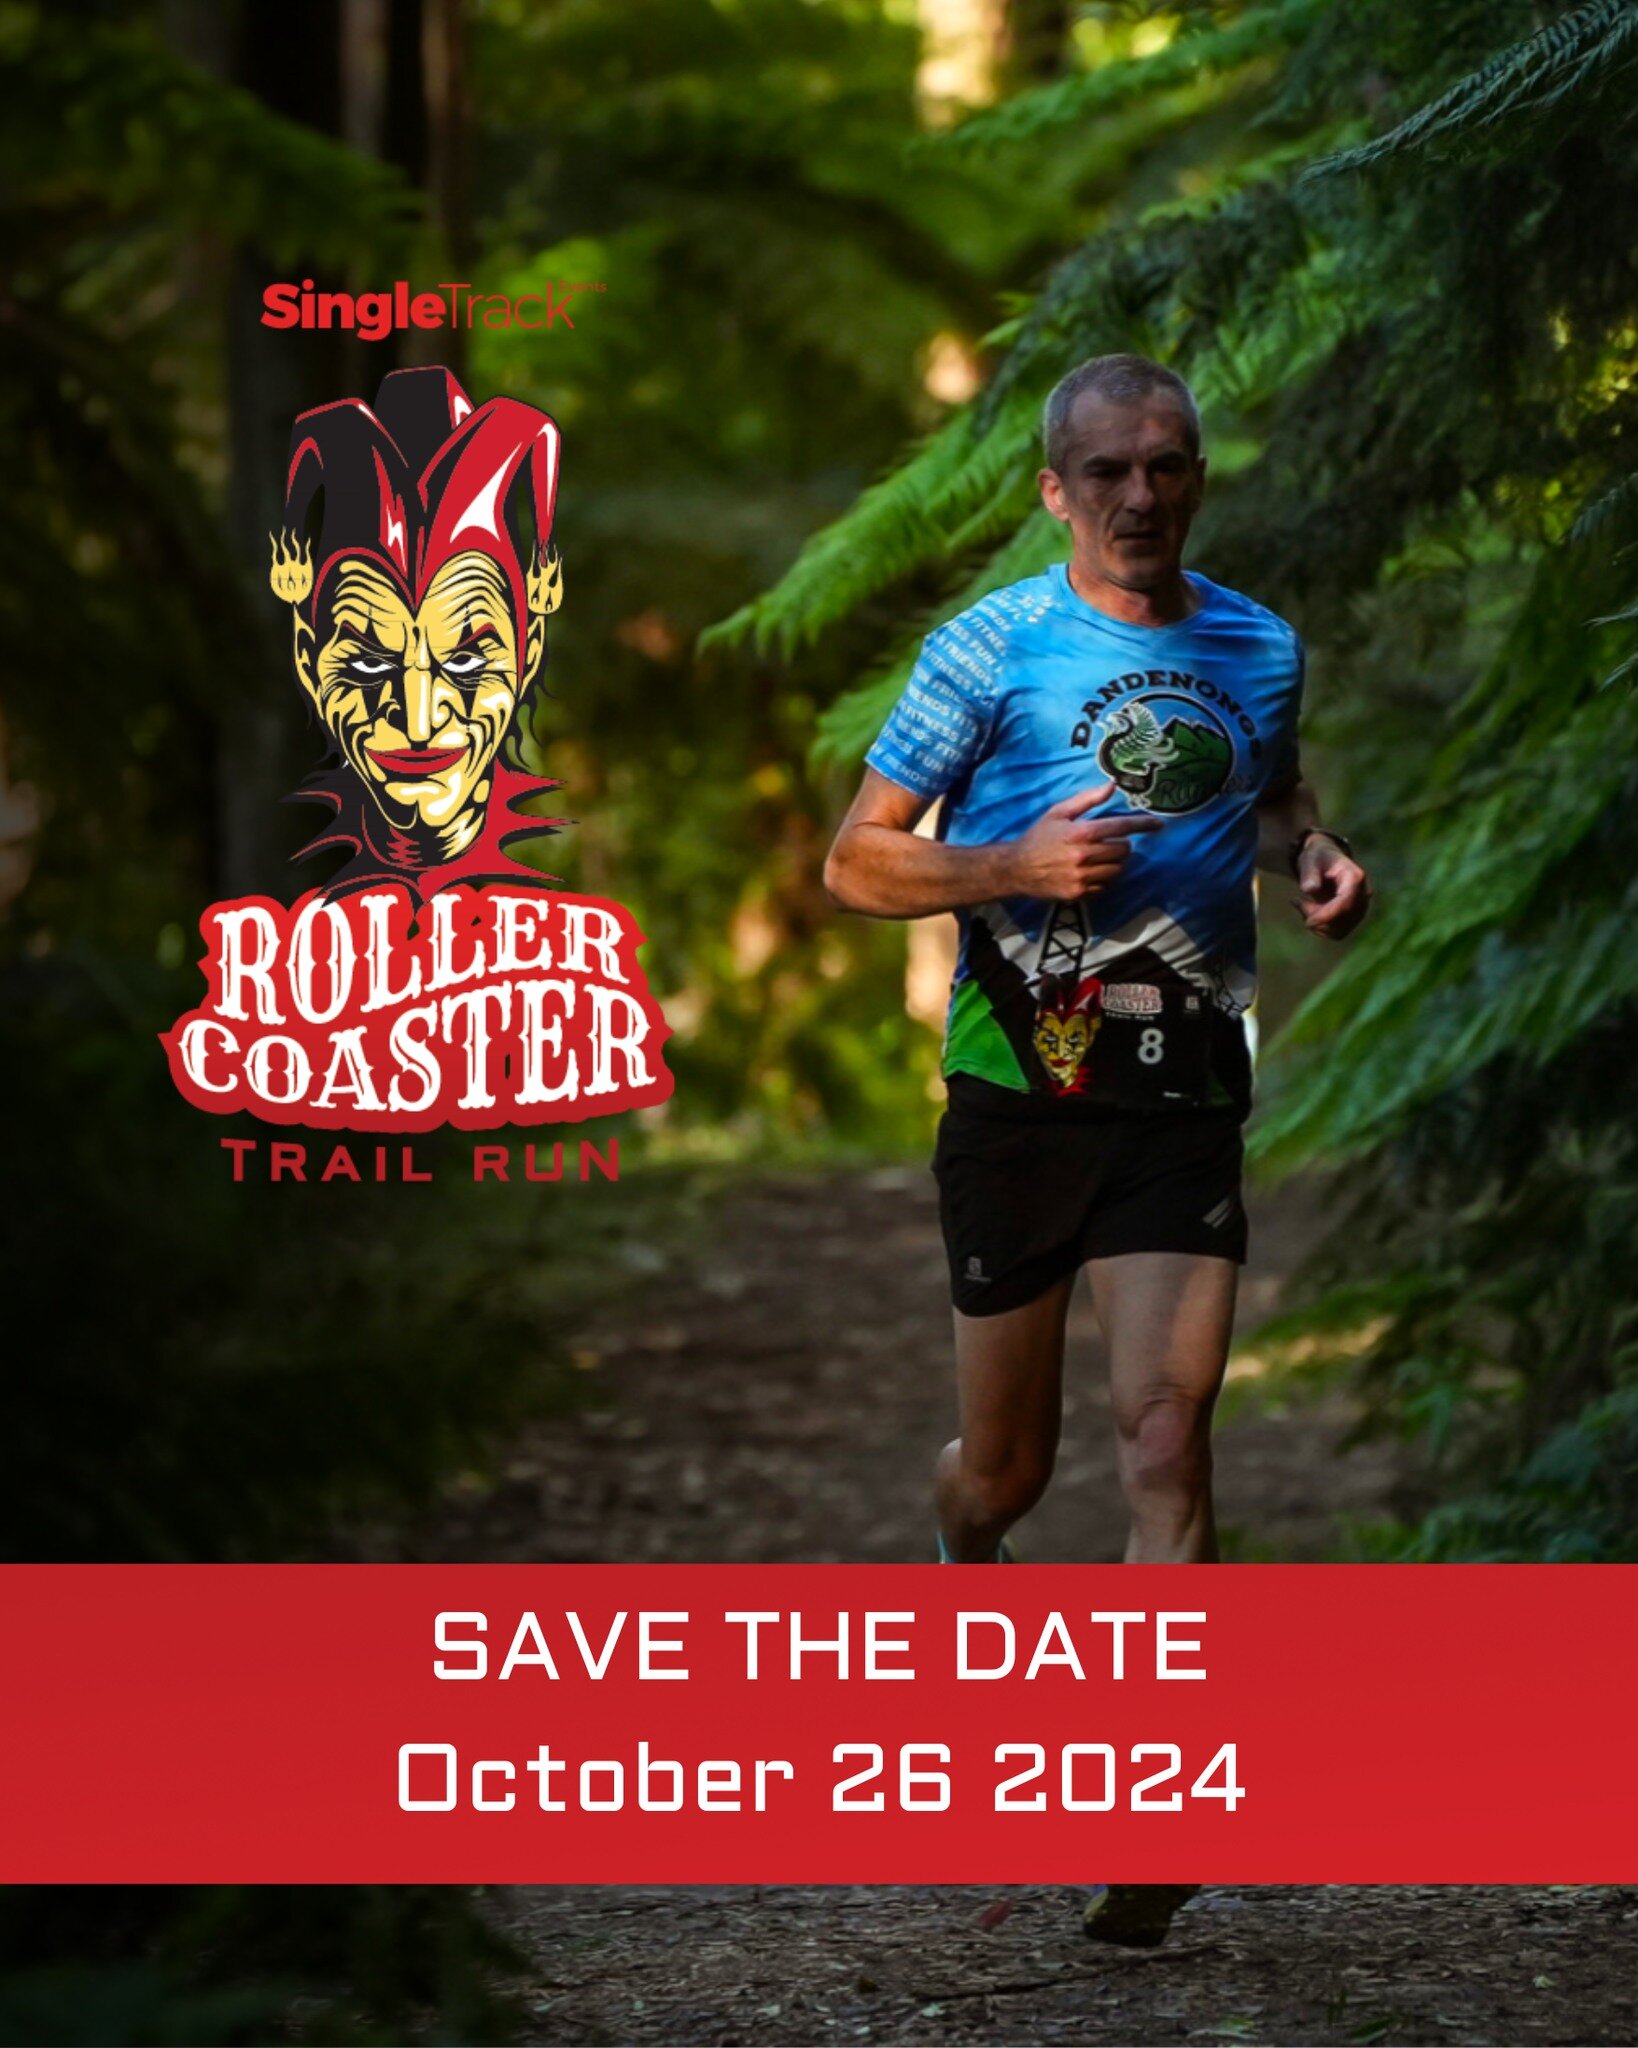 SAVE THE DATE! 🗓️
Saturday October 26, 2024

This year brings in a shiny new website, to go along with a shiny new Event Schedule that we know you're gonna love. Don't worry, we are still offering all the same much loved races with the same courses,